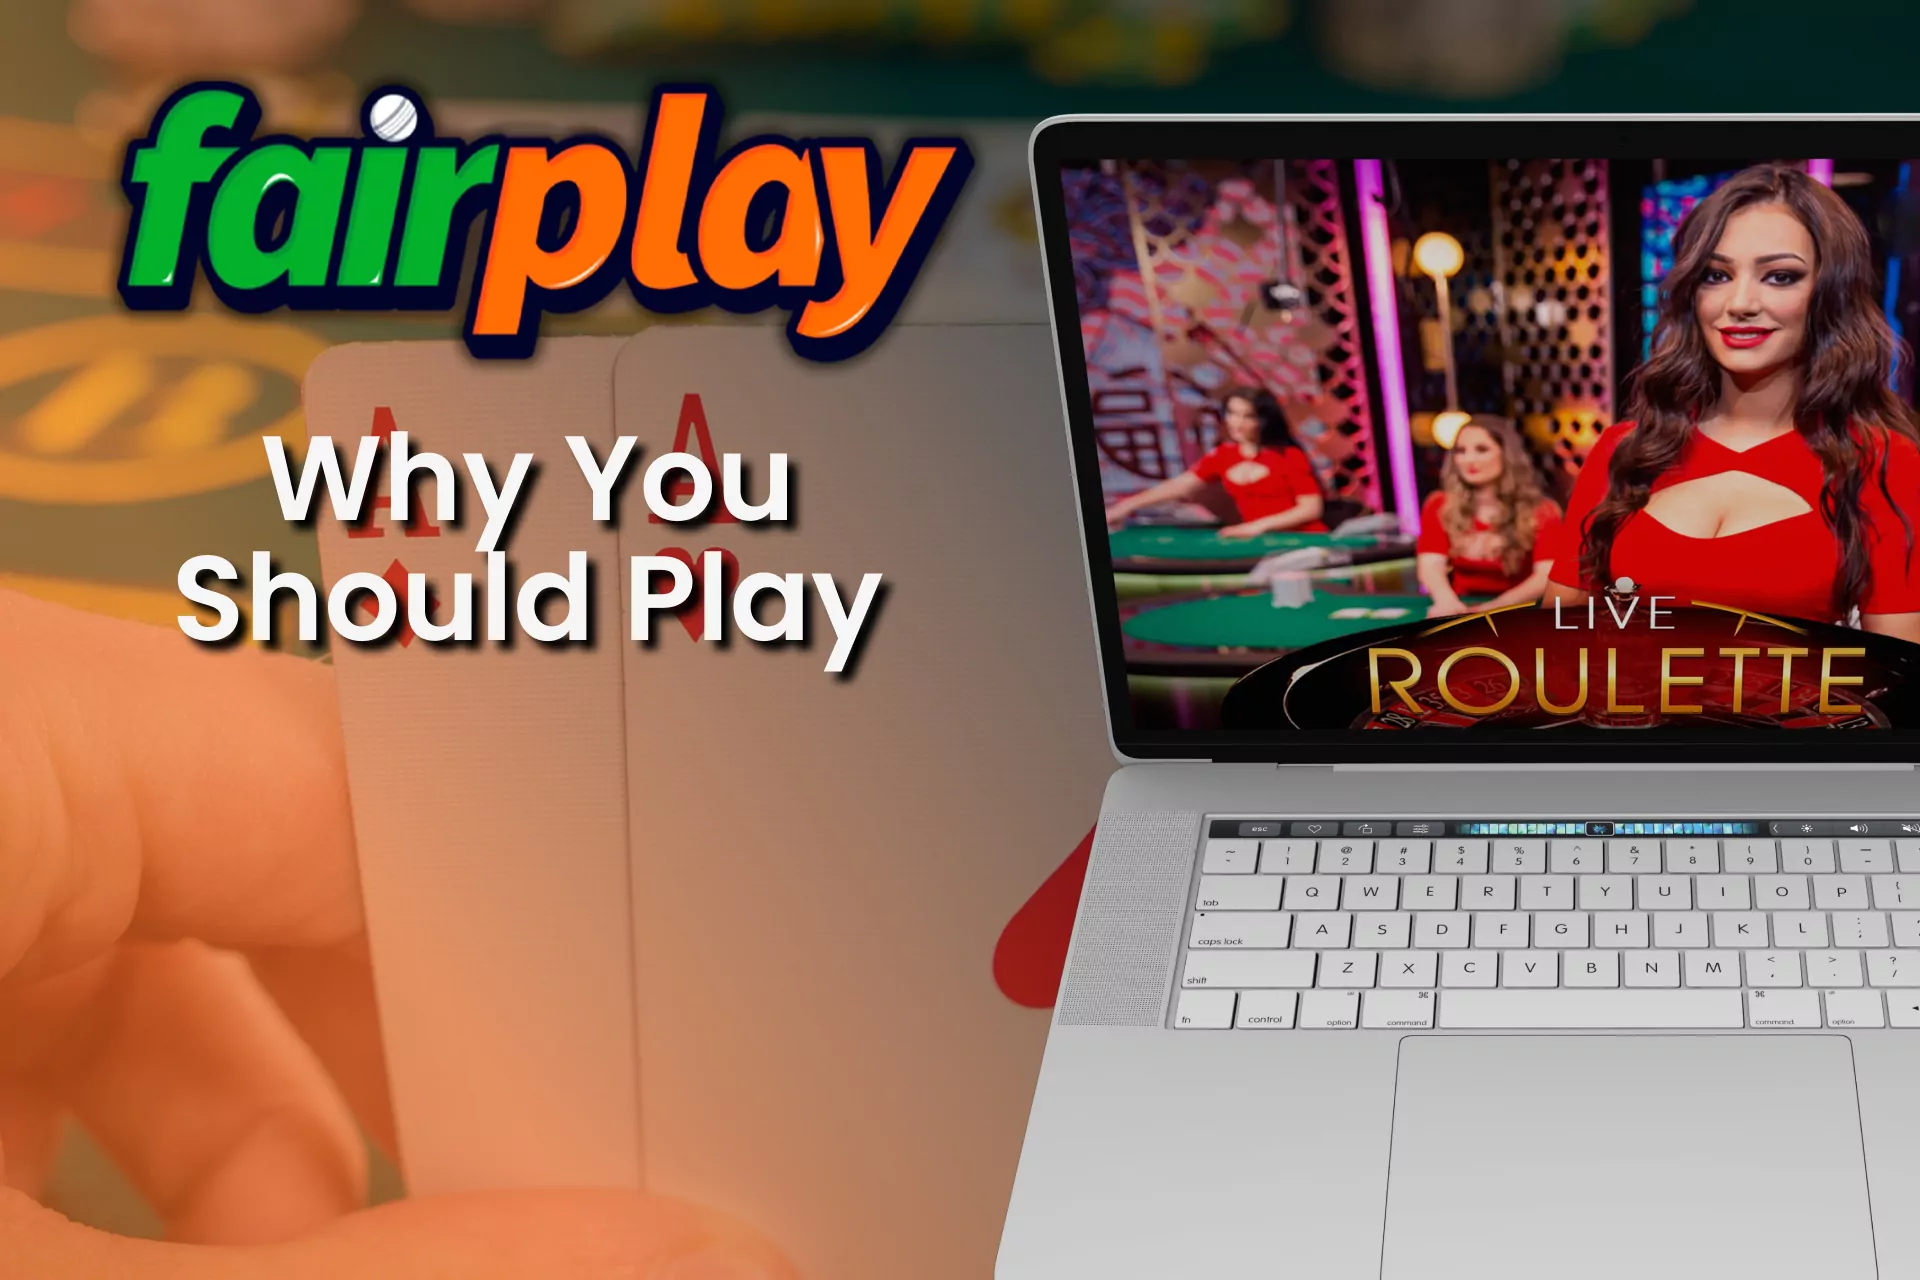 Fairplay provides many opportunities for casino games.